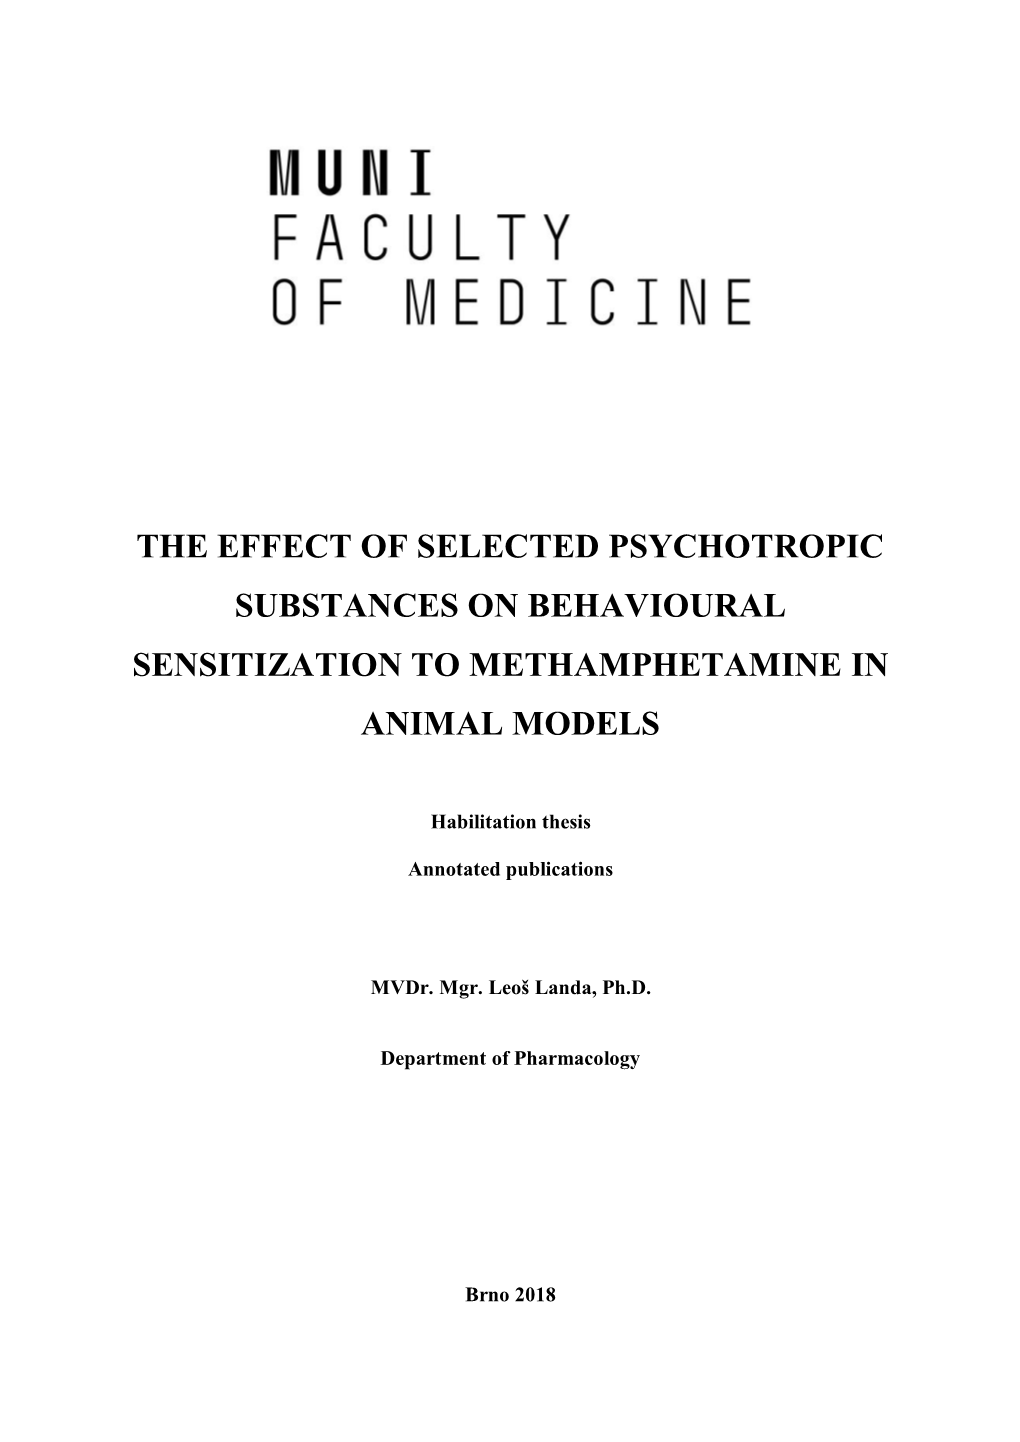 The Effect of Selected Psychotropic Substances on Behavioural Sensitization to Methamphetamine in Animal Models